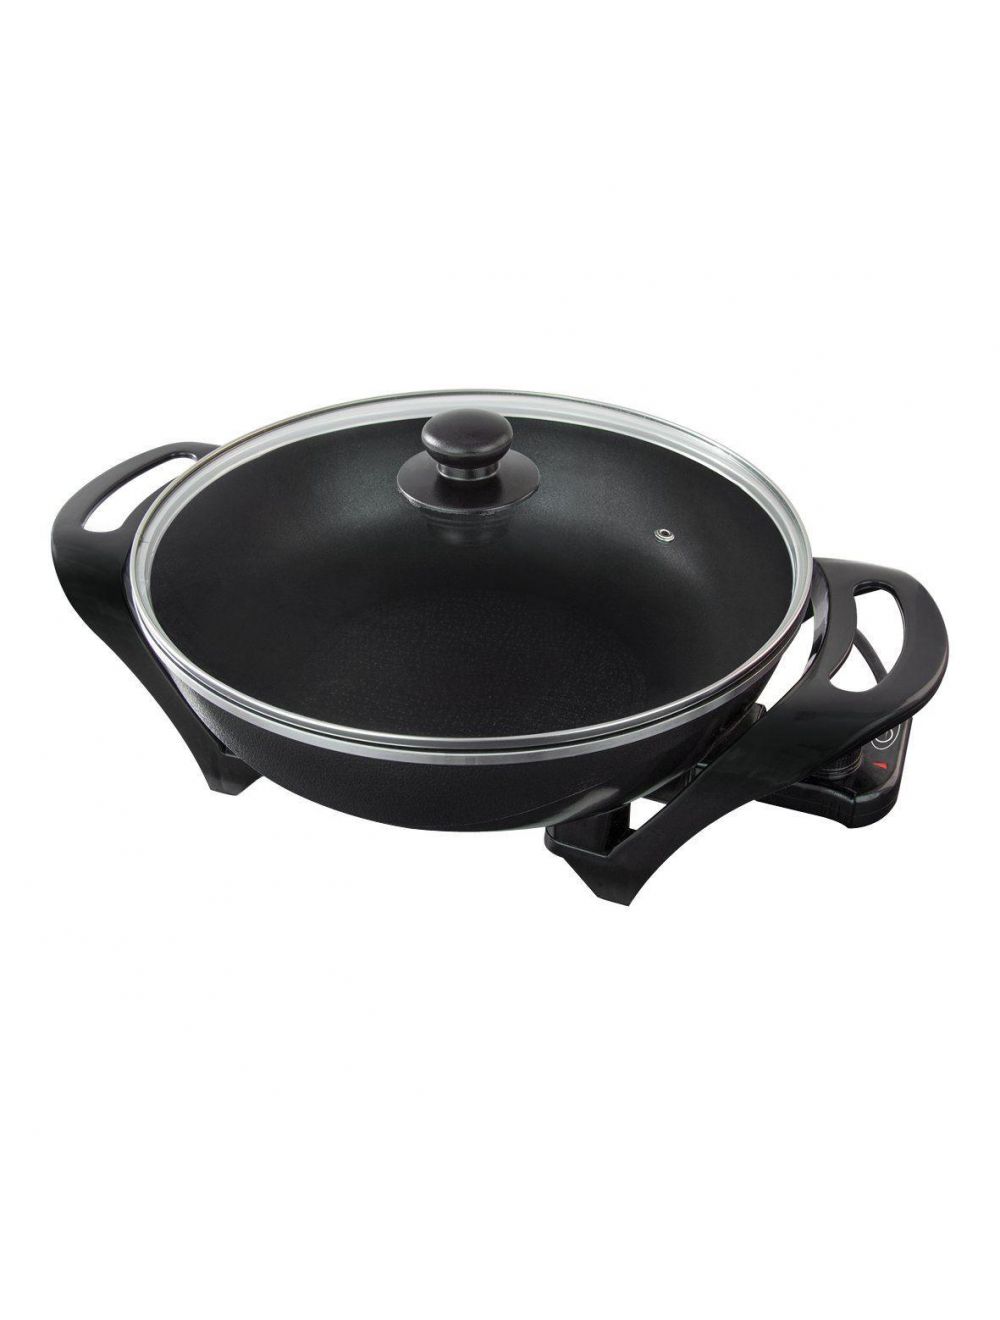 Unibos 1500w Electric Non-Stick Wok with Lid Fast Heating Temperature Control Black 